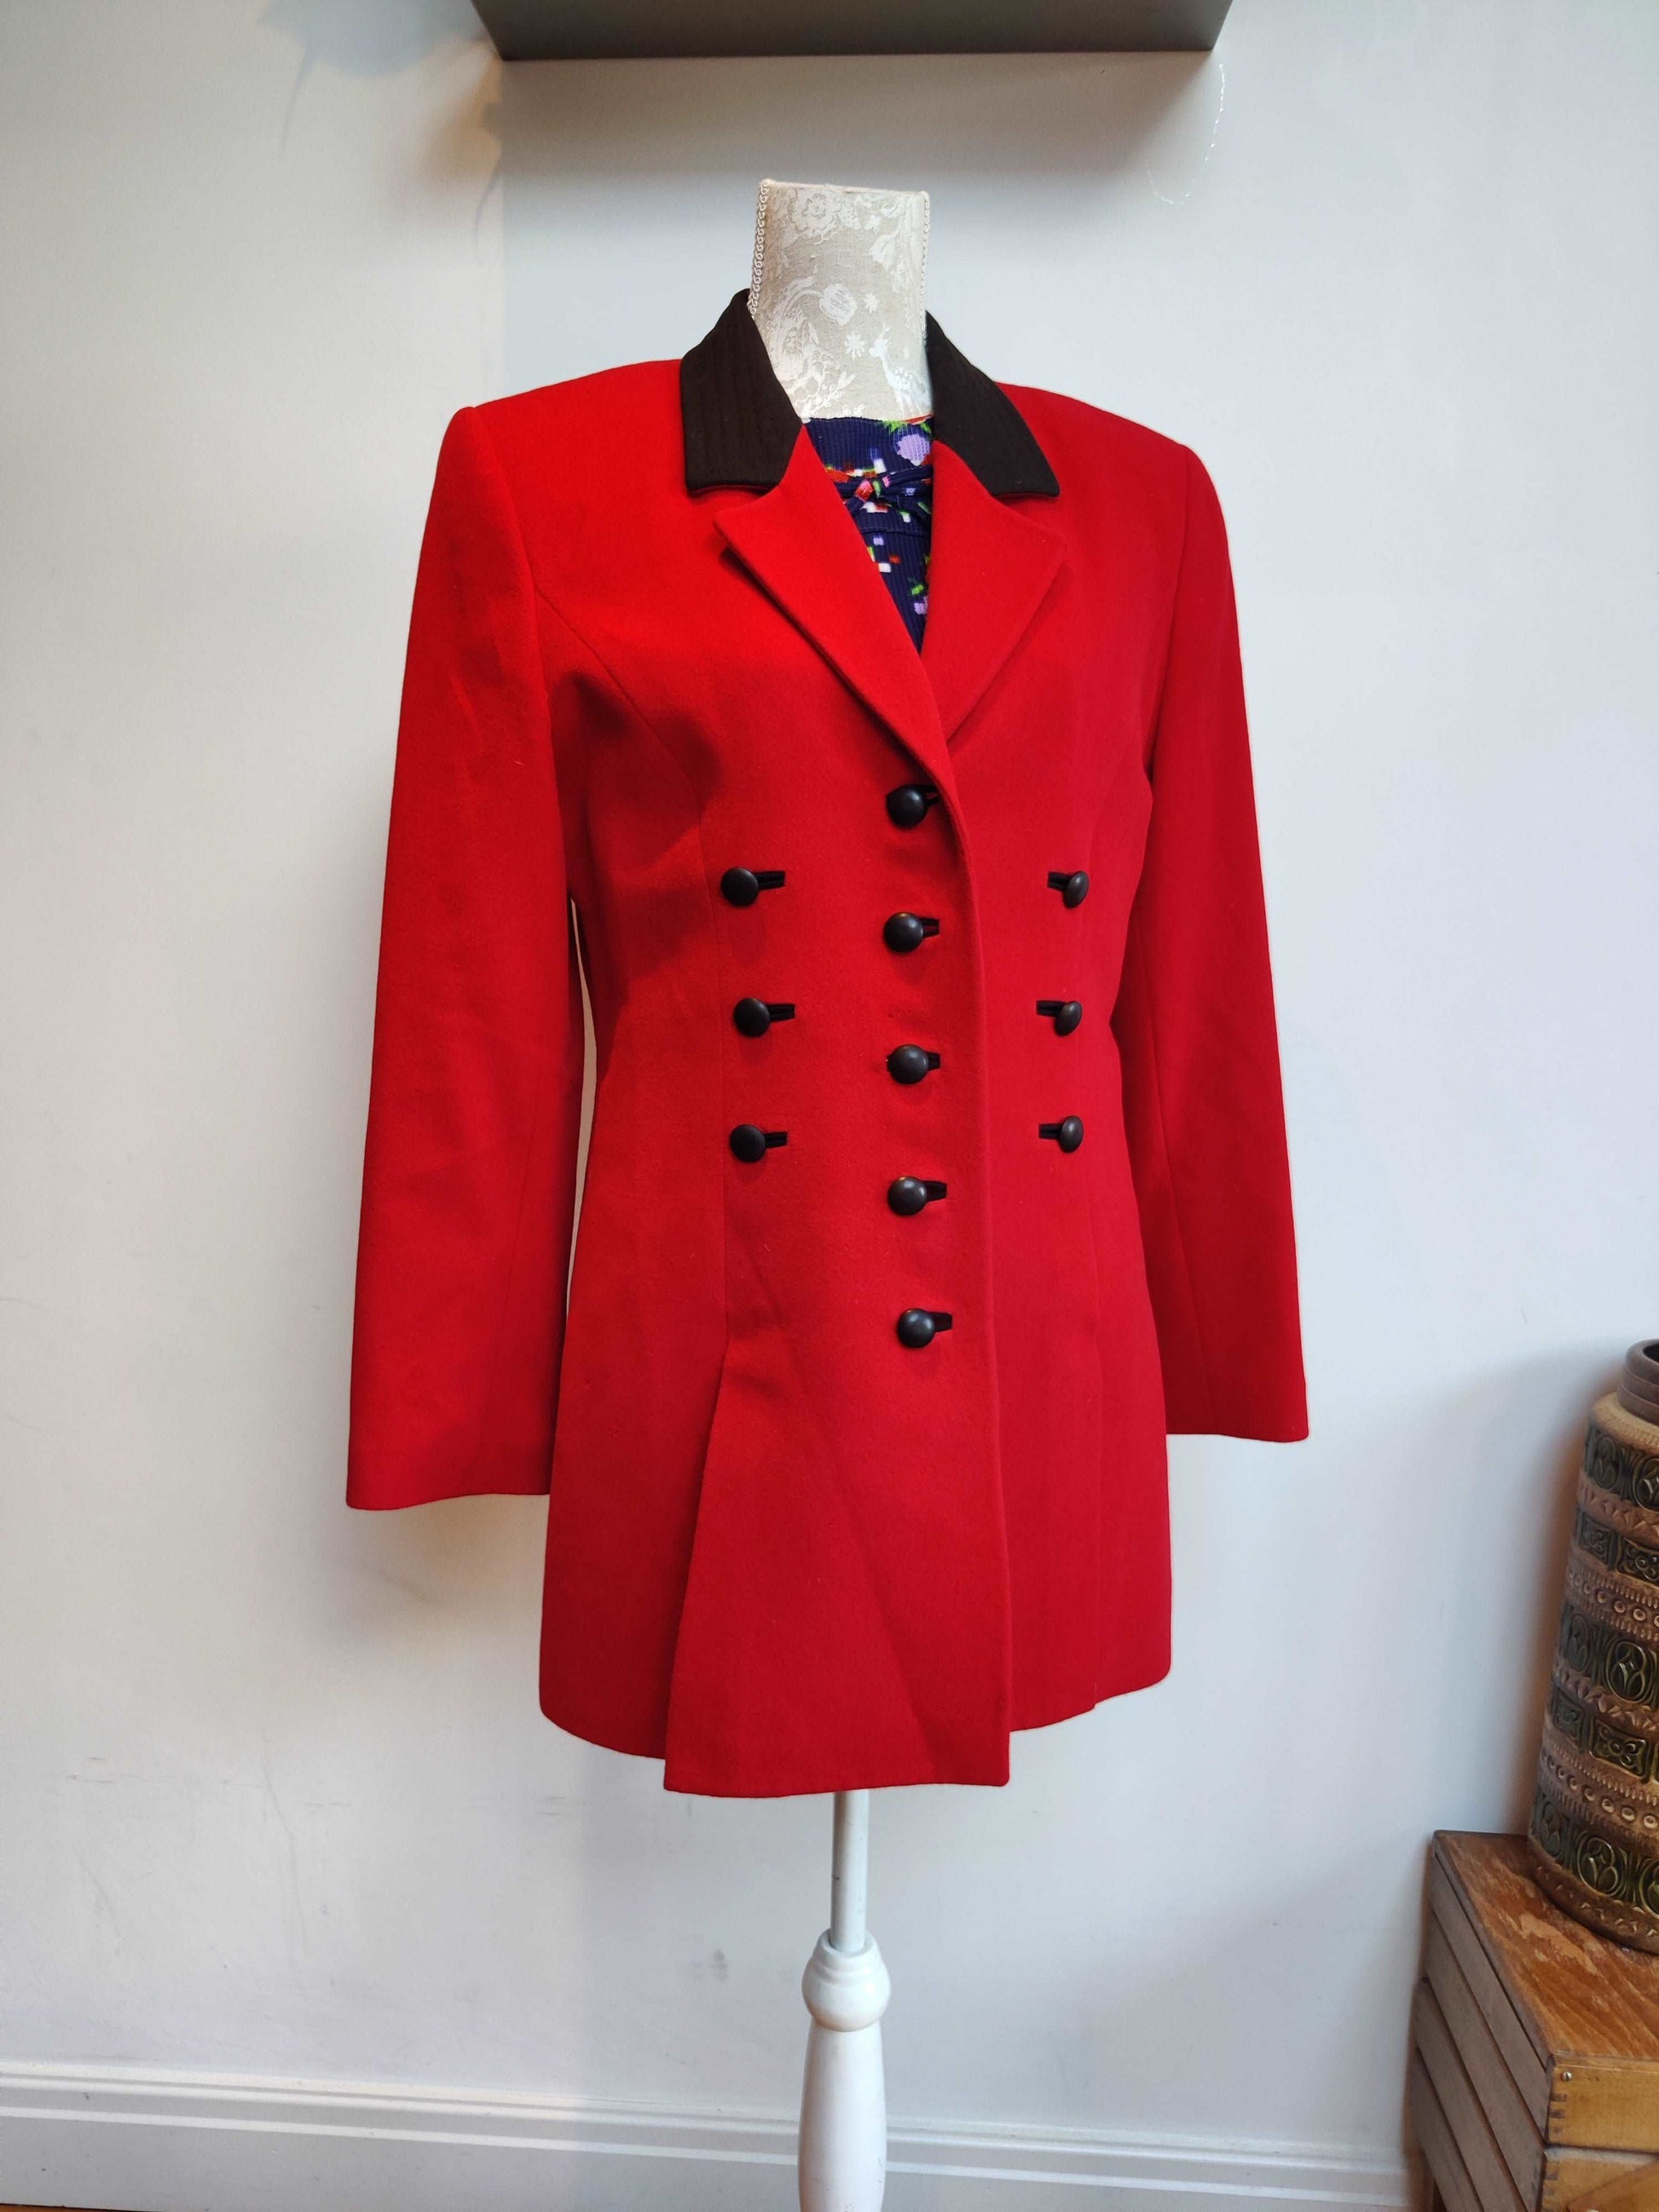 Incredible 80s Louis Feraud jacket in red and black